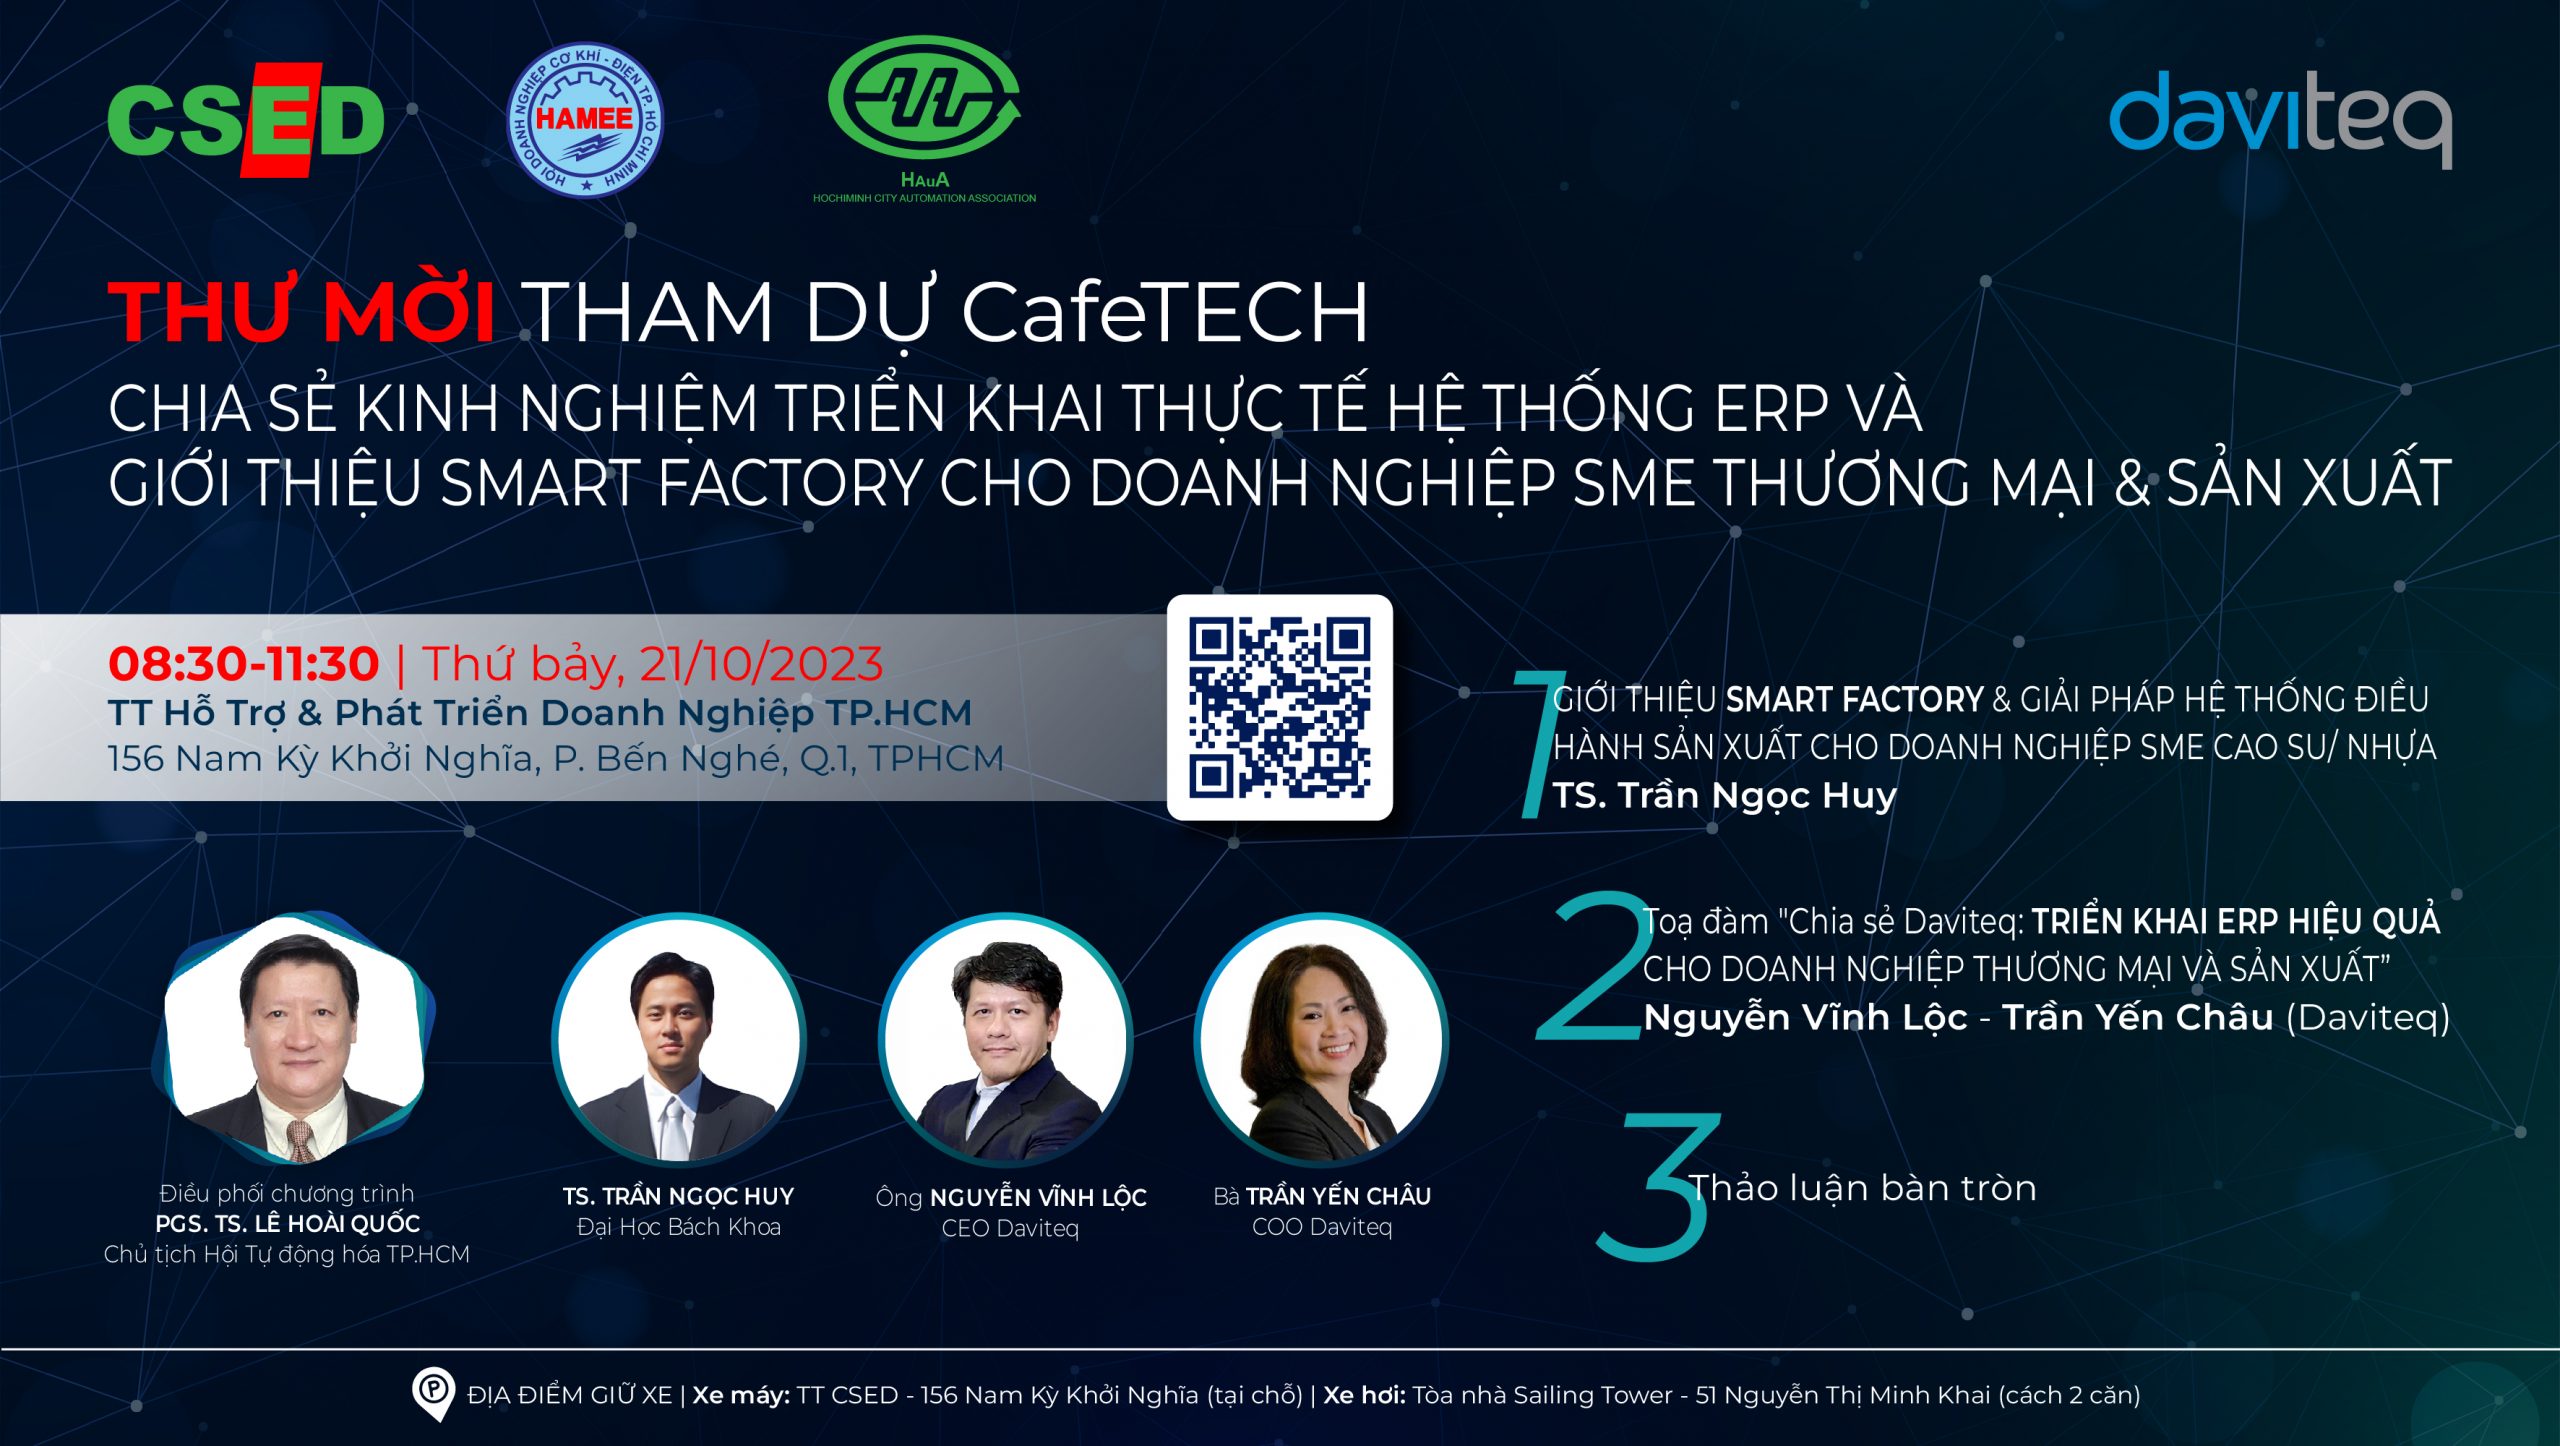 Invitation to cafeTECH 2023